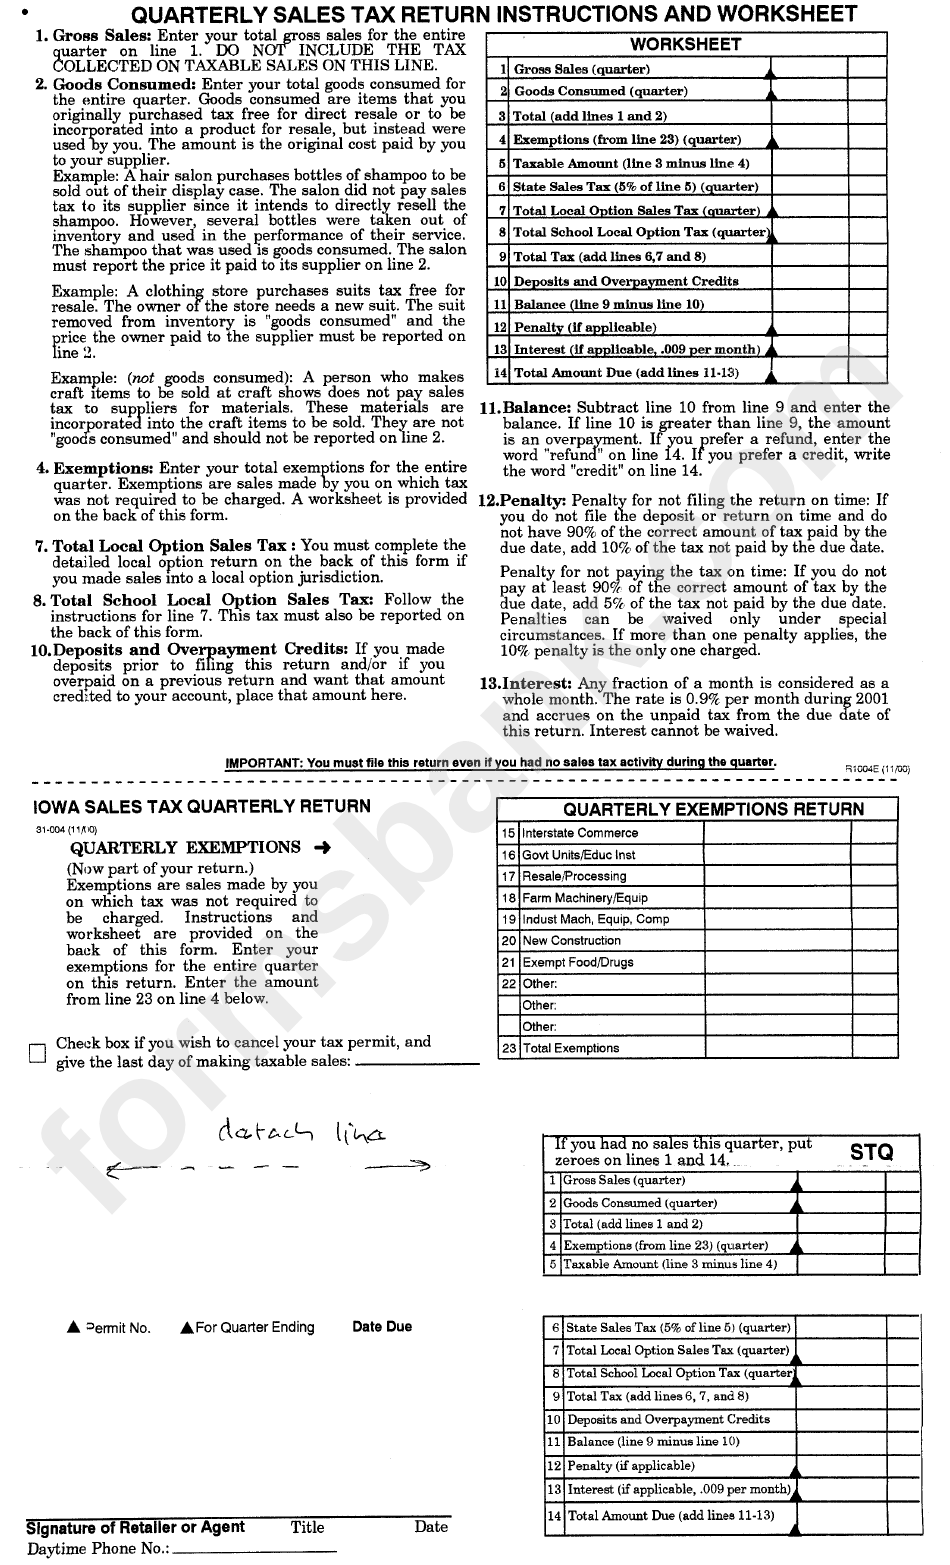 Quarterly Sales Tax Return Form Instructions And Worksheet printable